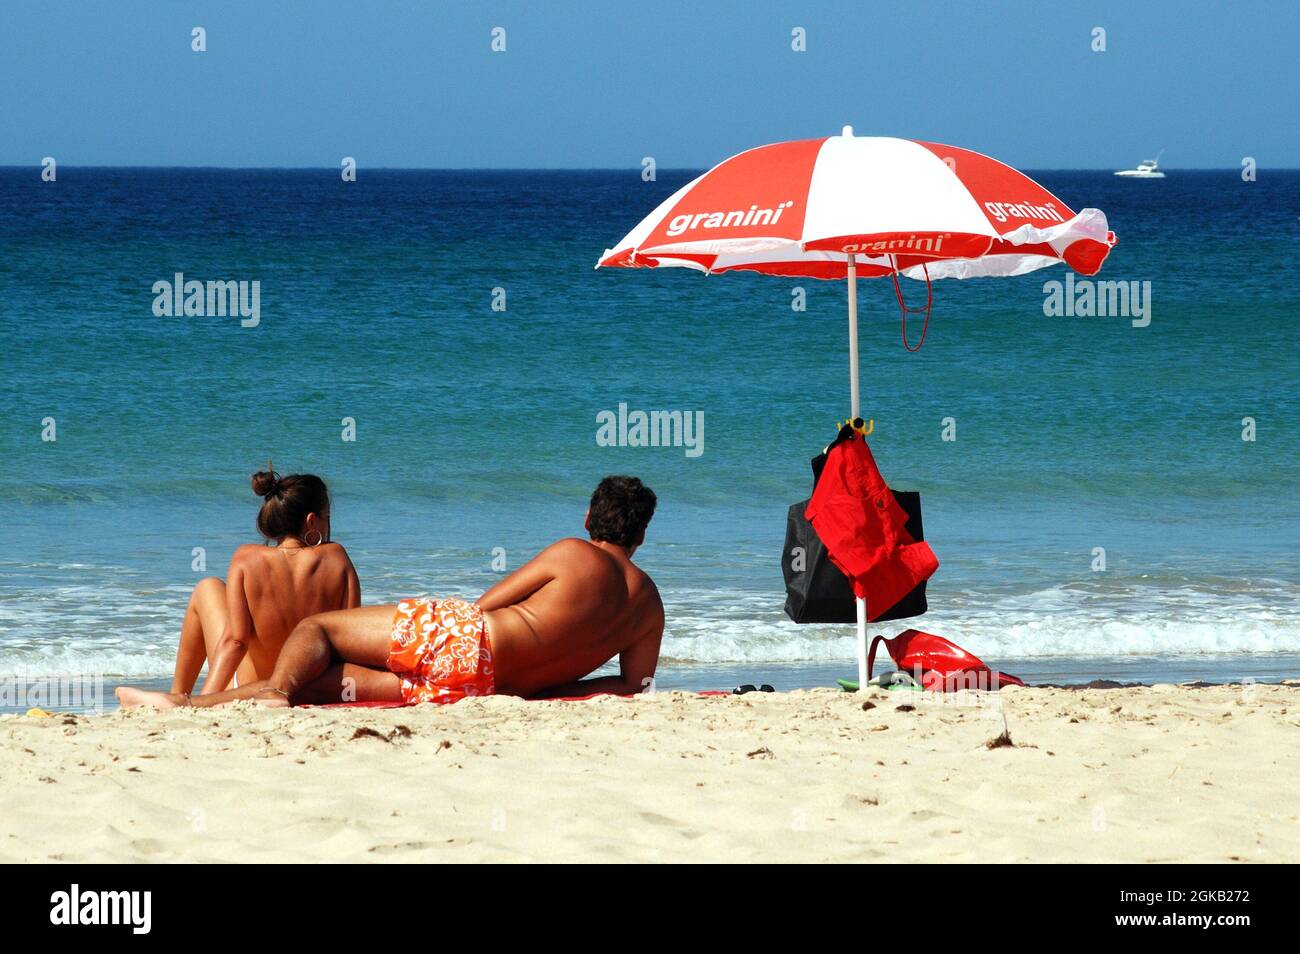 Young couple with a parasol sunbathing by the waters edge on the beach with views out to sea, Zahara de los Atunes, Spain. Stock Photo